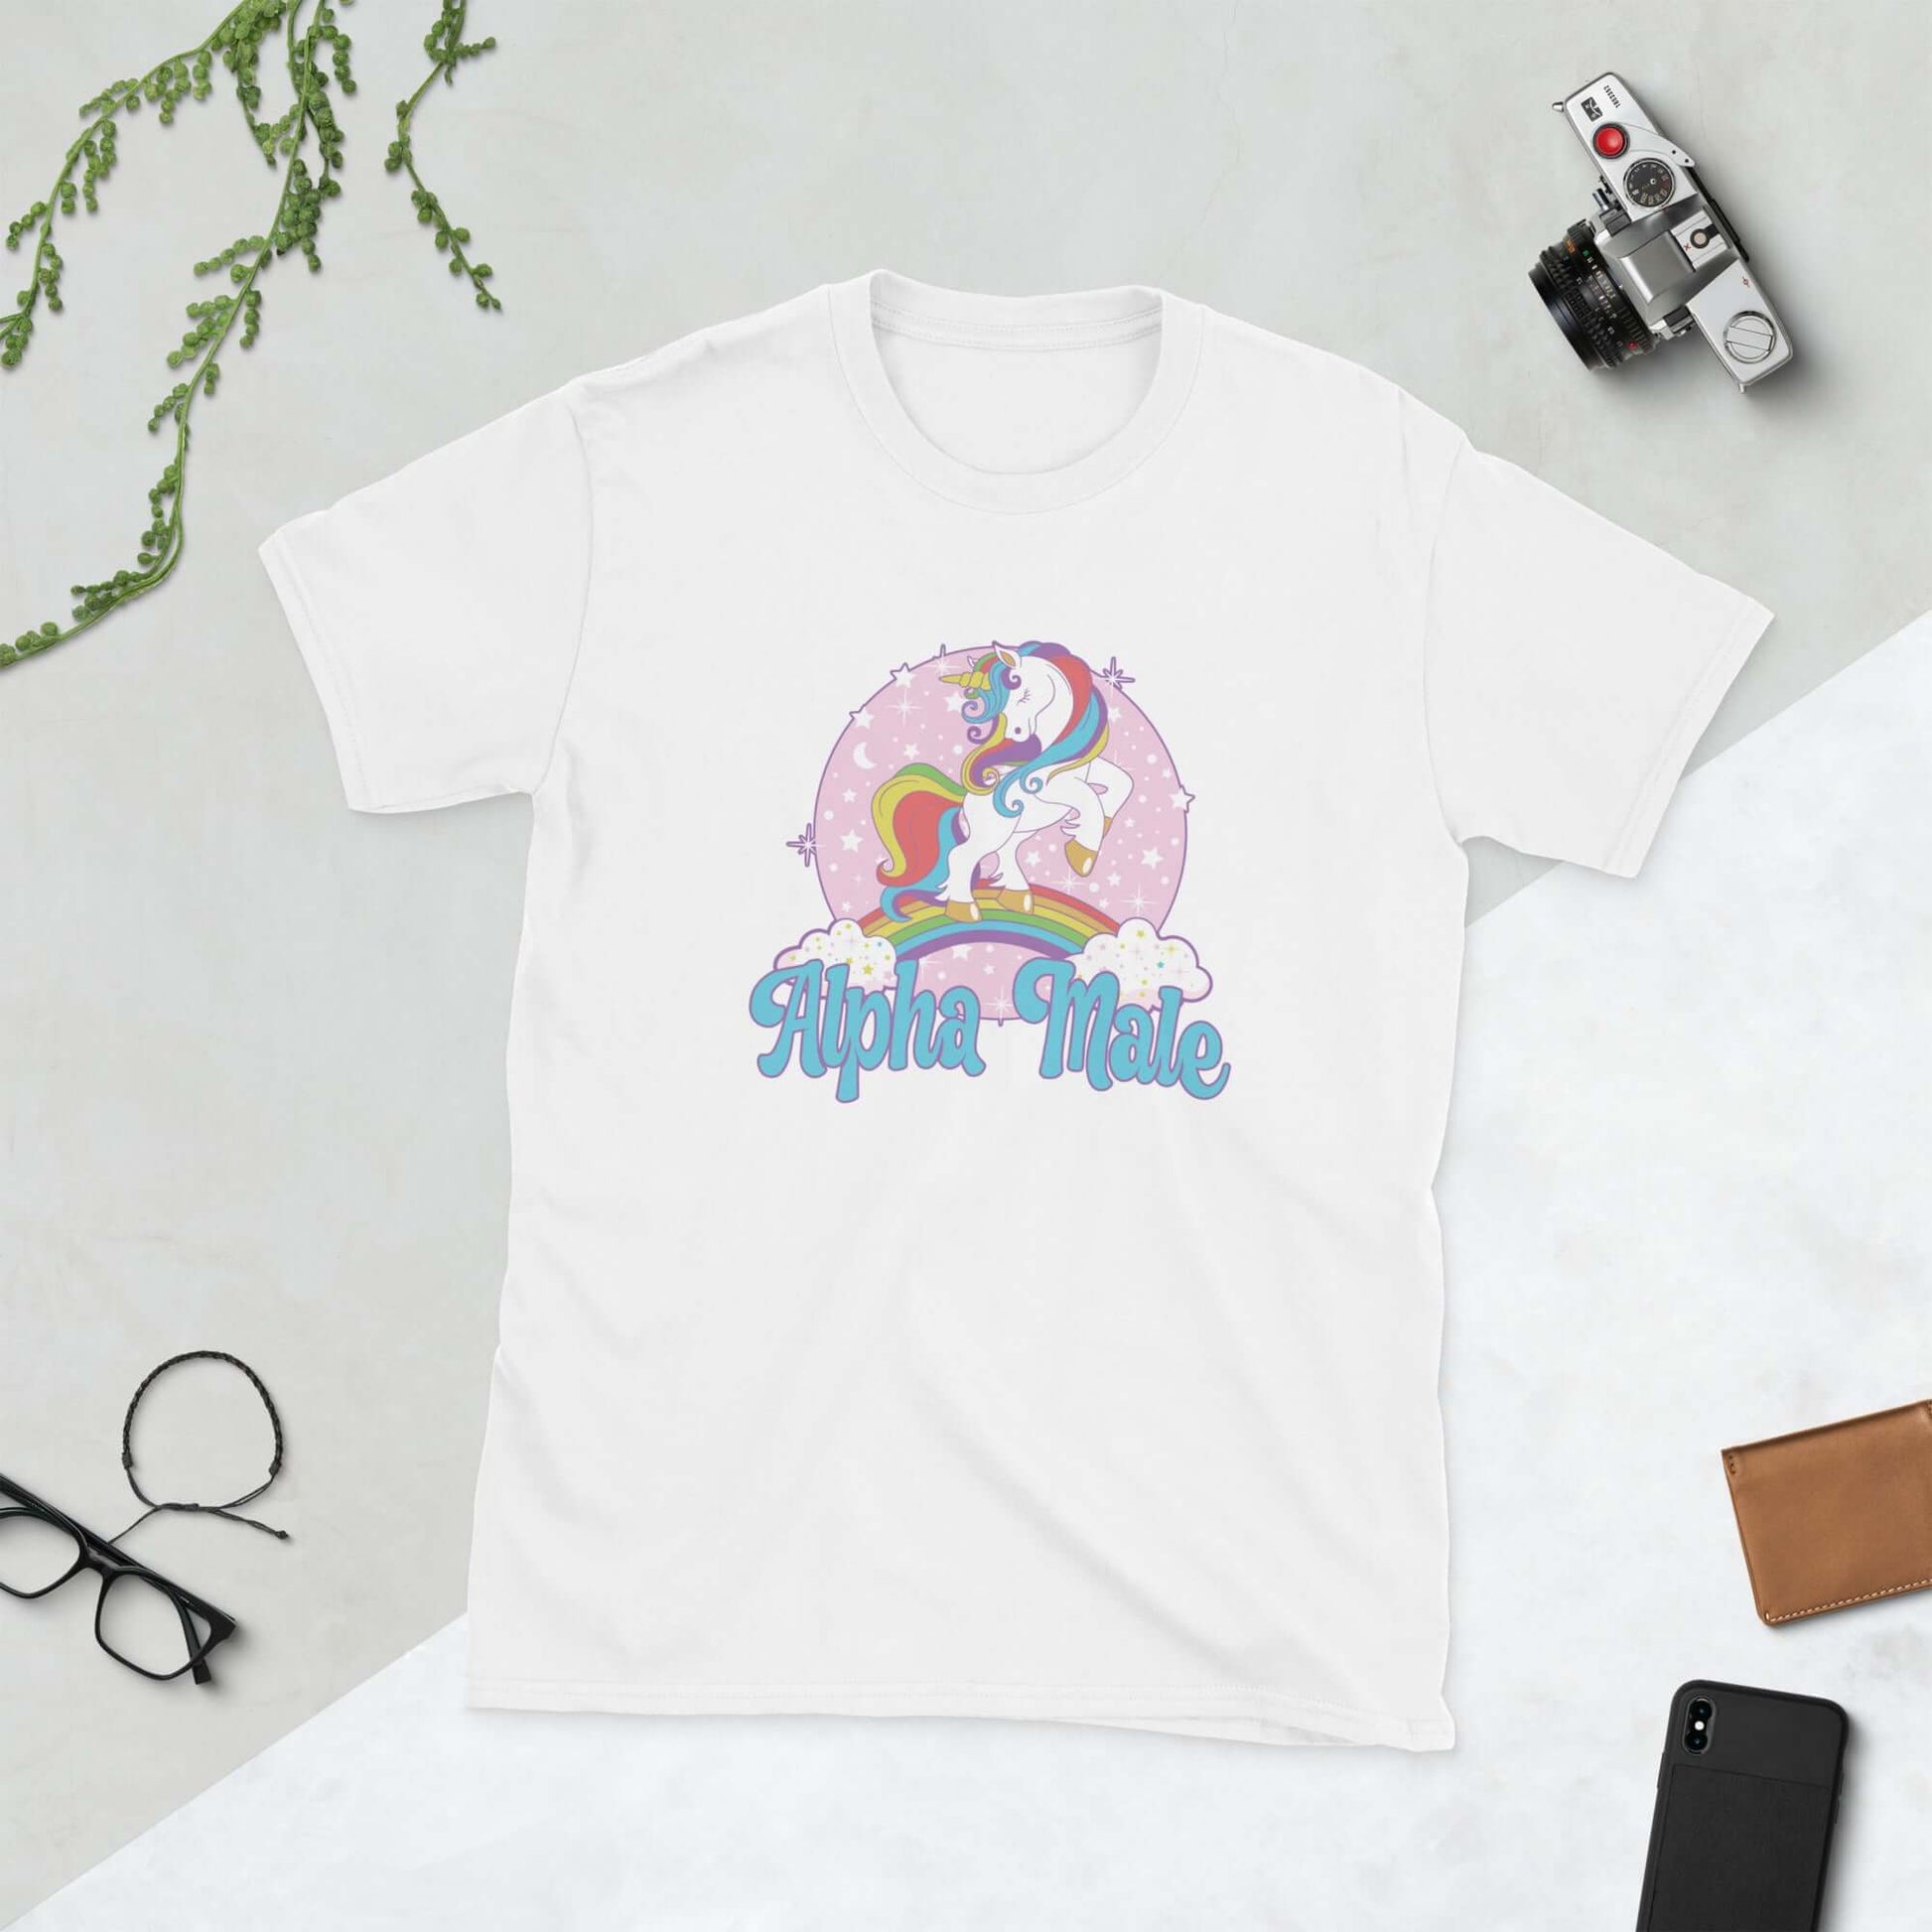 white t-tshirt that says Alpha Male with unicorn graphics